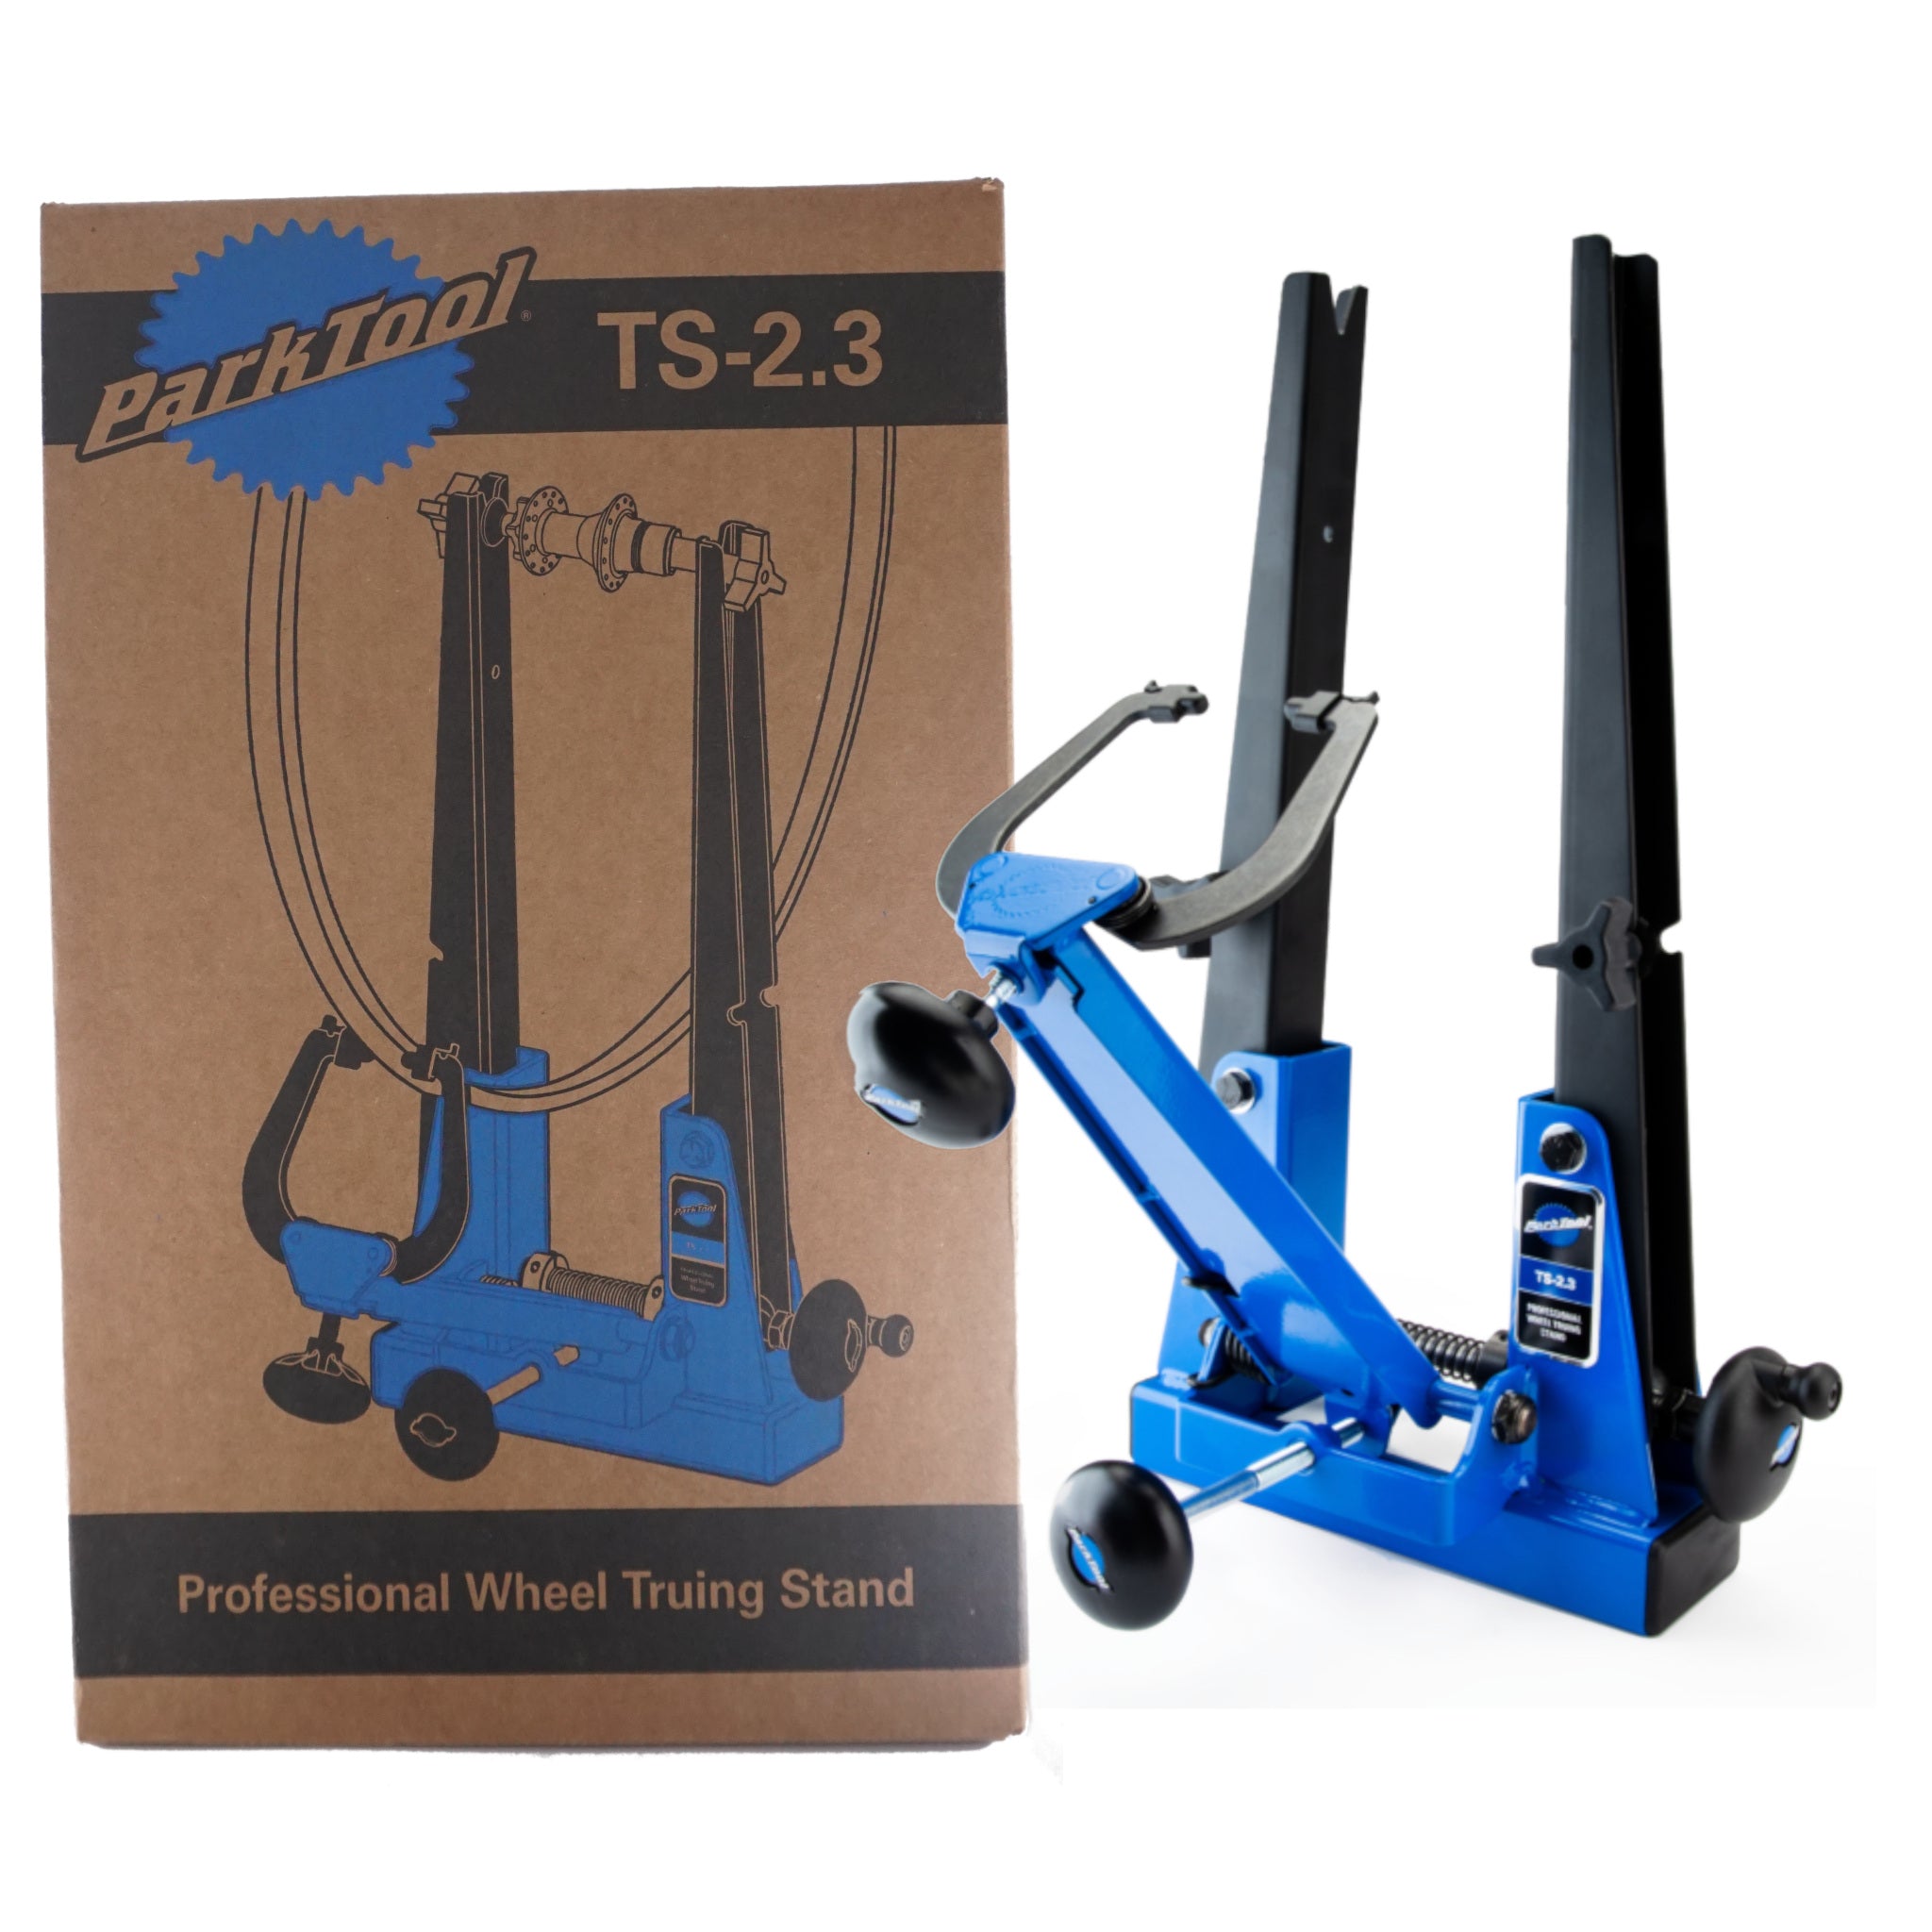 Park Tool TS-2.3 Professional Wheel Truing Stand - The Bikesmiths